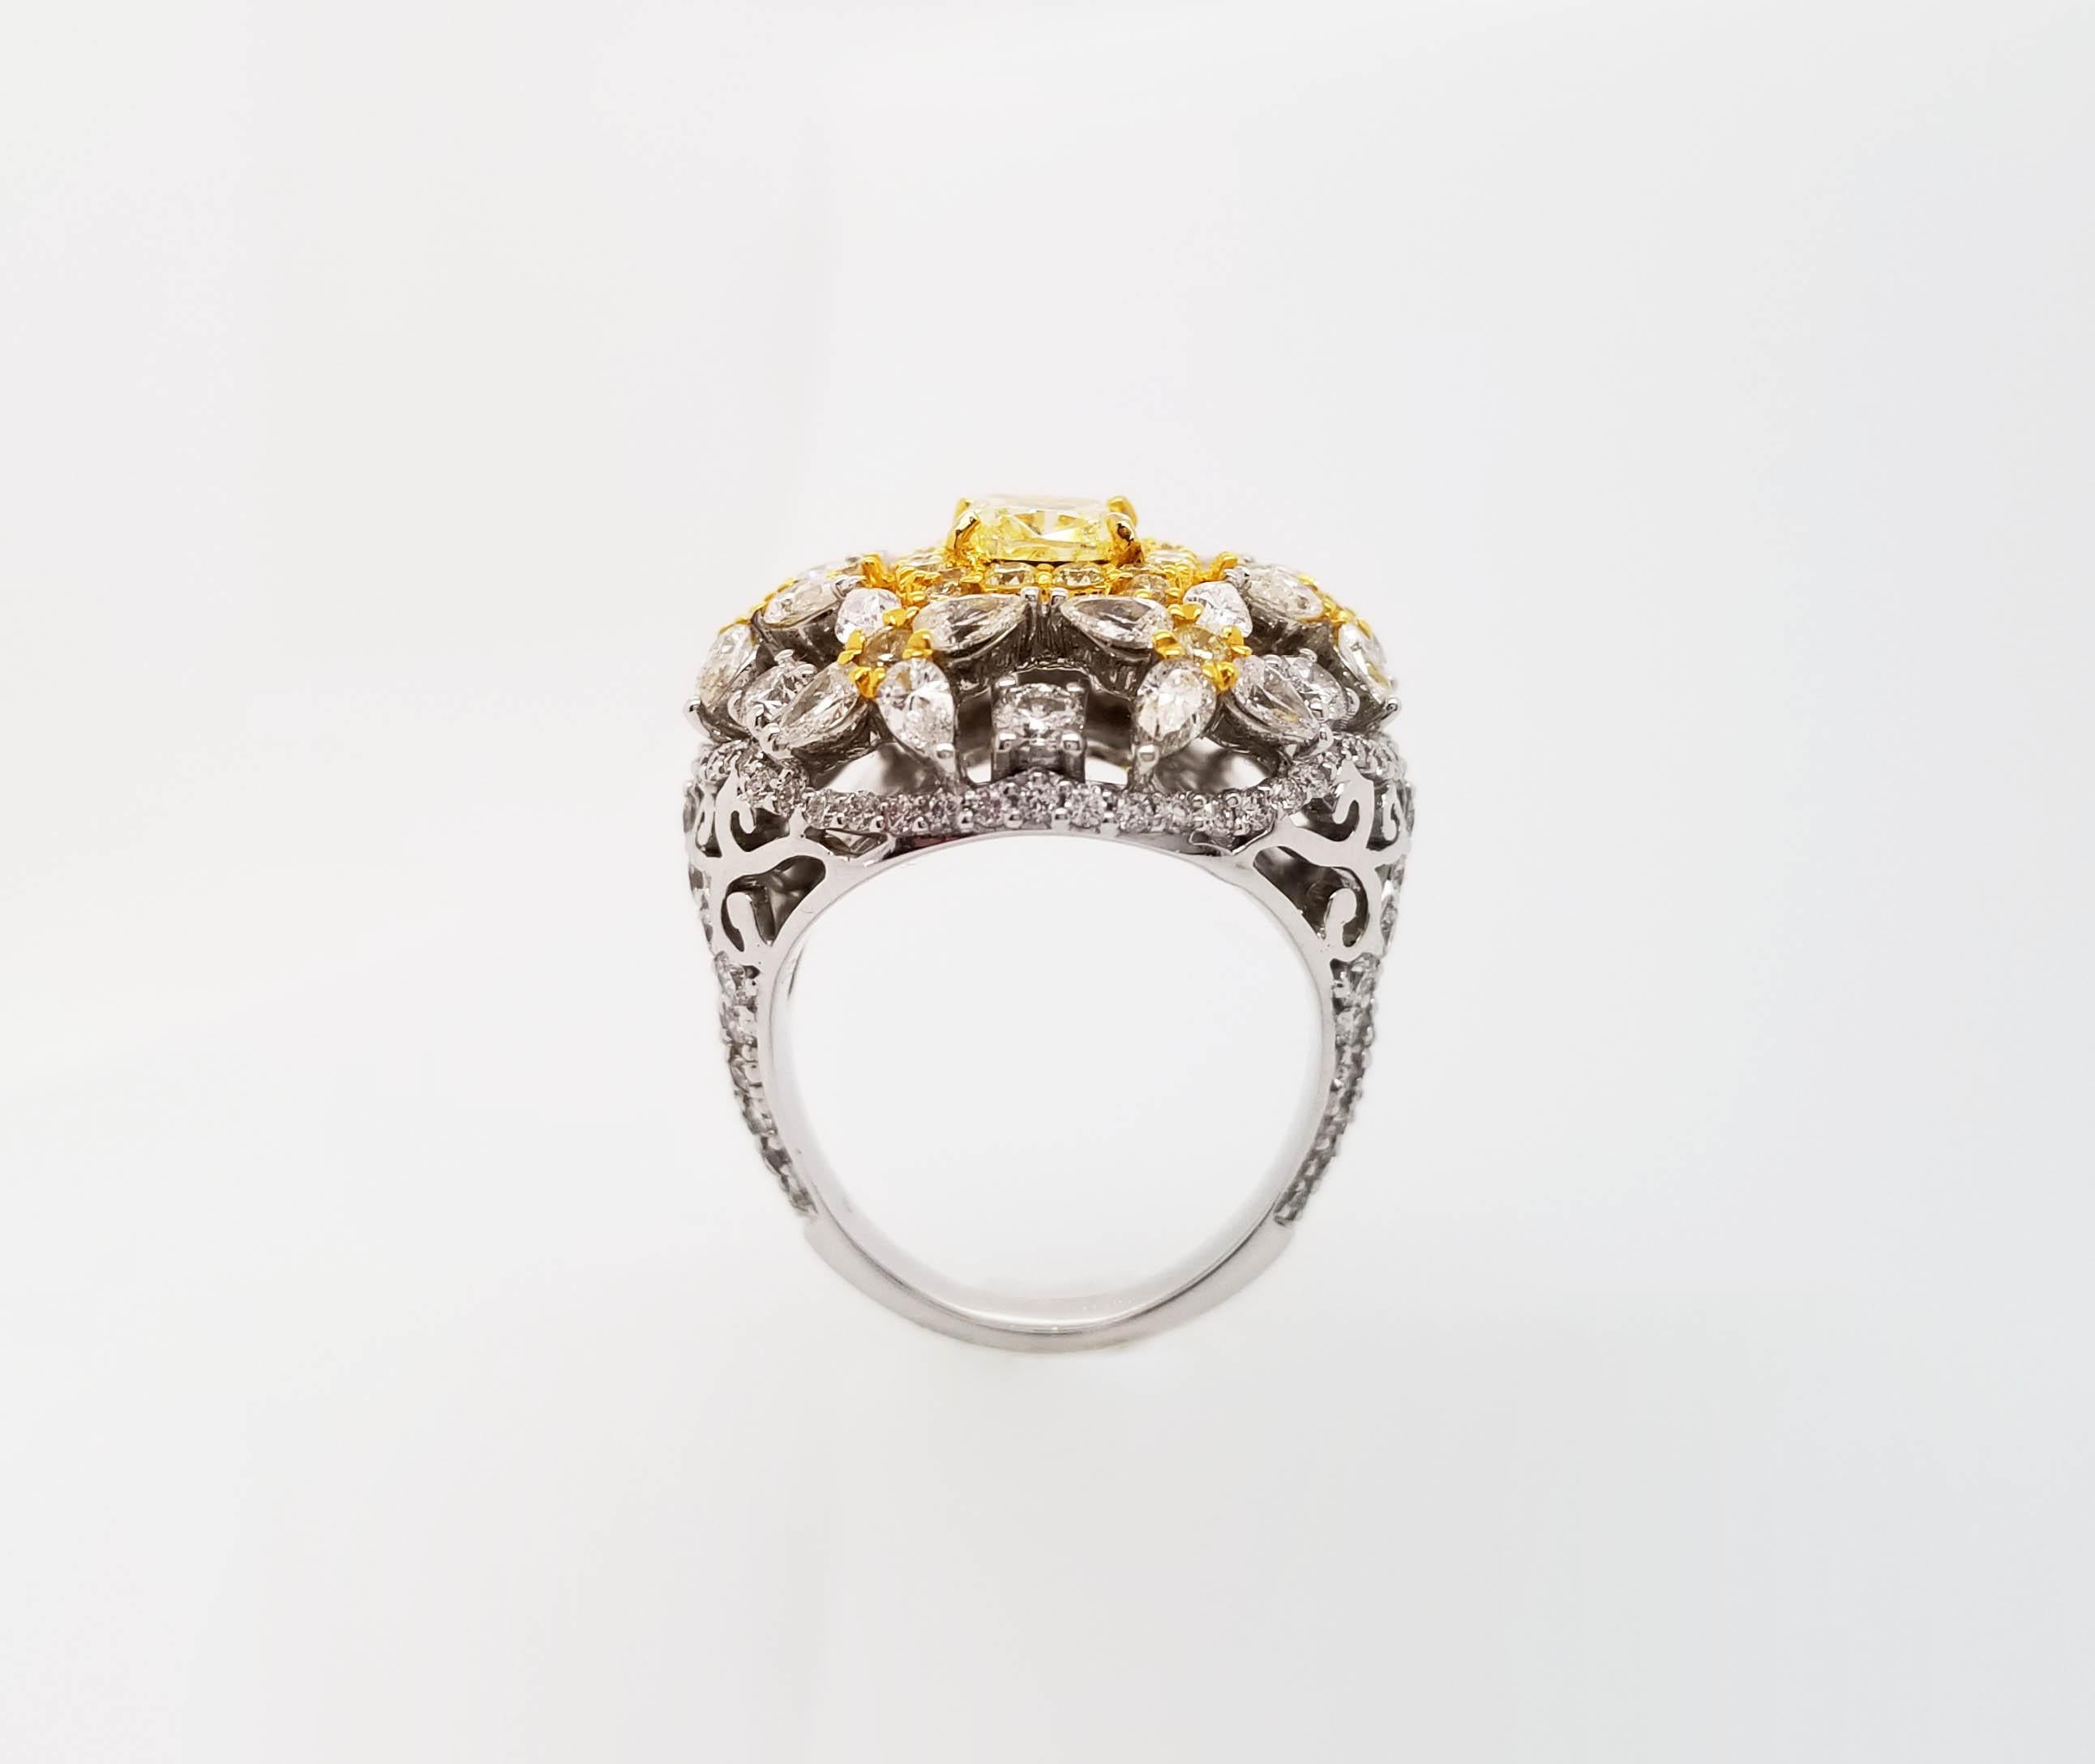 Scarselli Cocktail Ring with 1.00 Carat Fancy Yellow Radiant Diamonds GIA 1